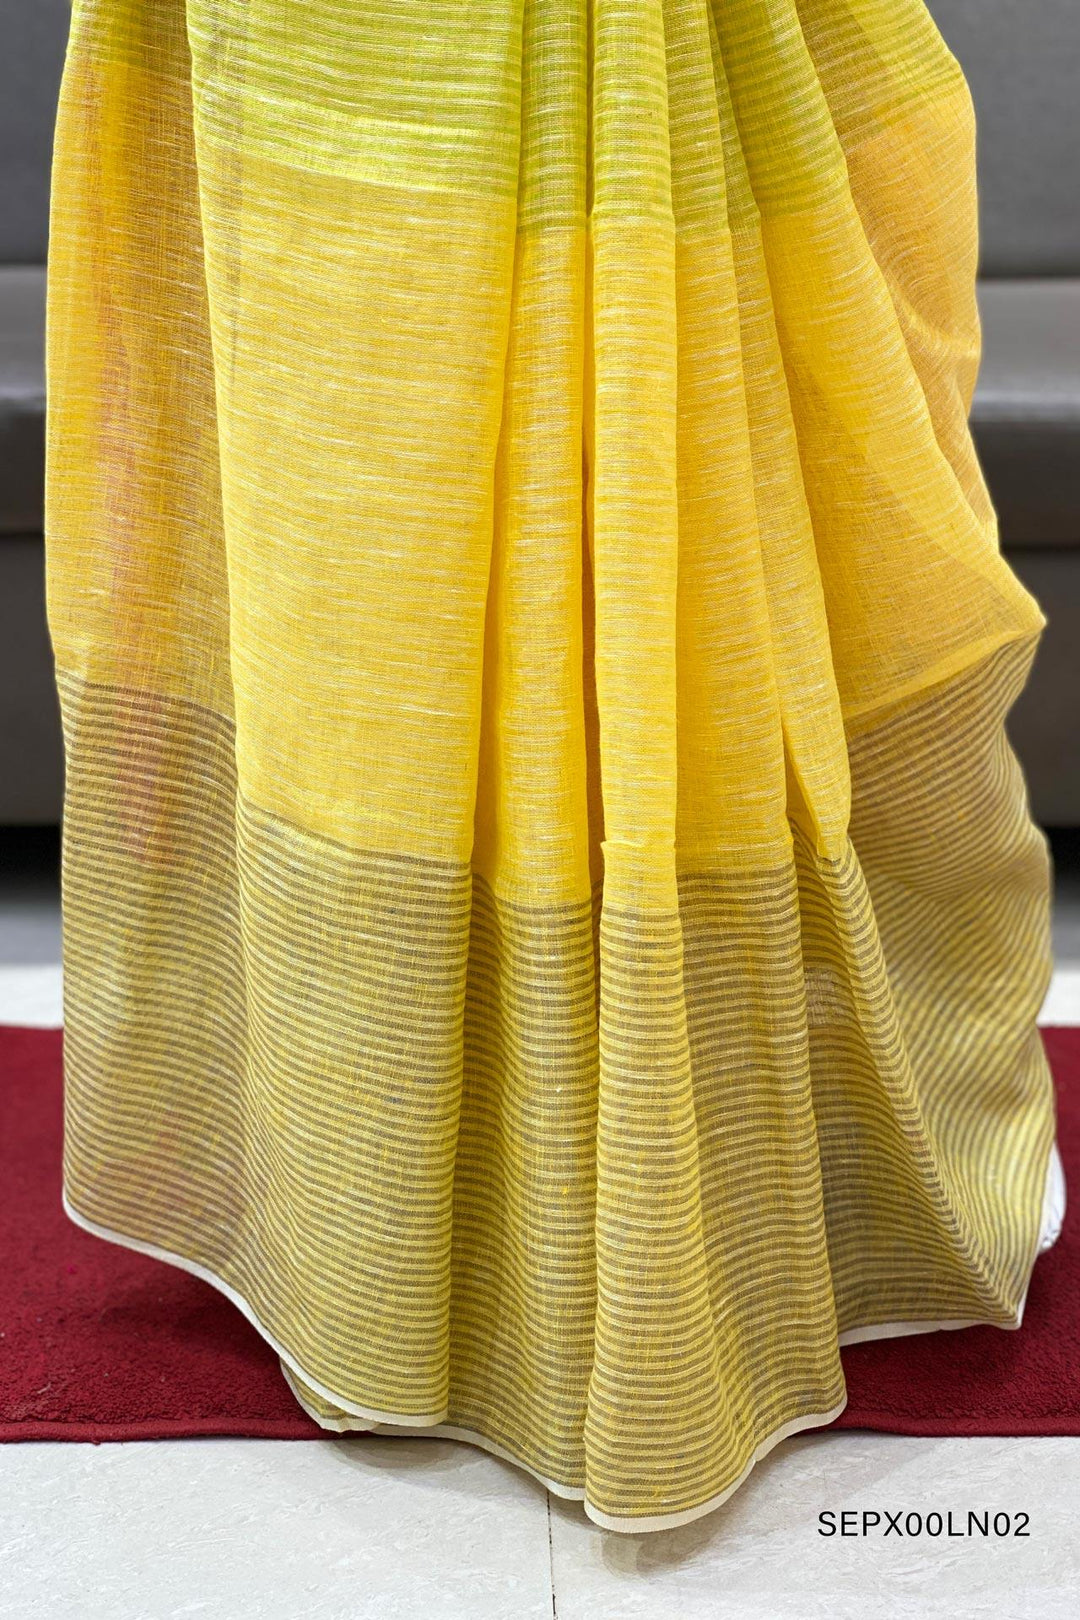 Shades of Yellow Striped Patterned Linen Saree -V iew 4